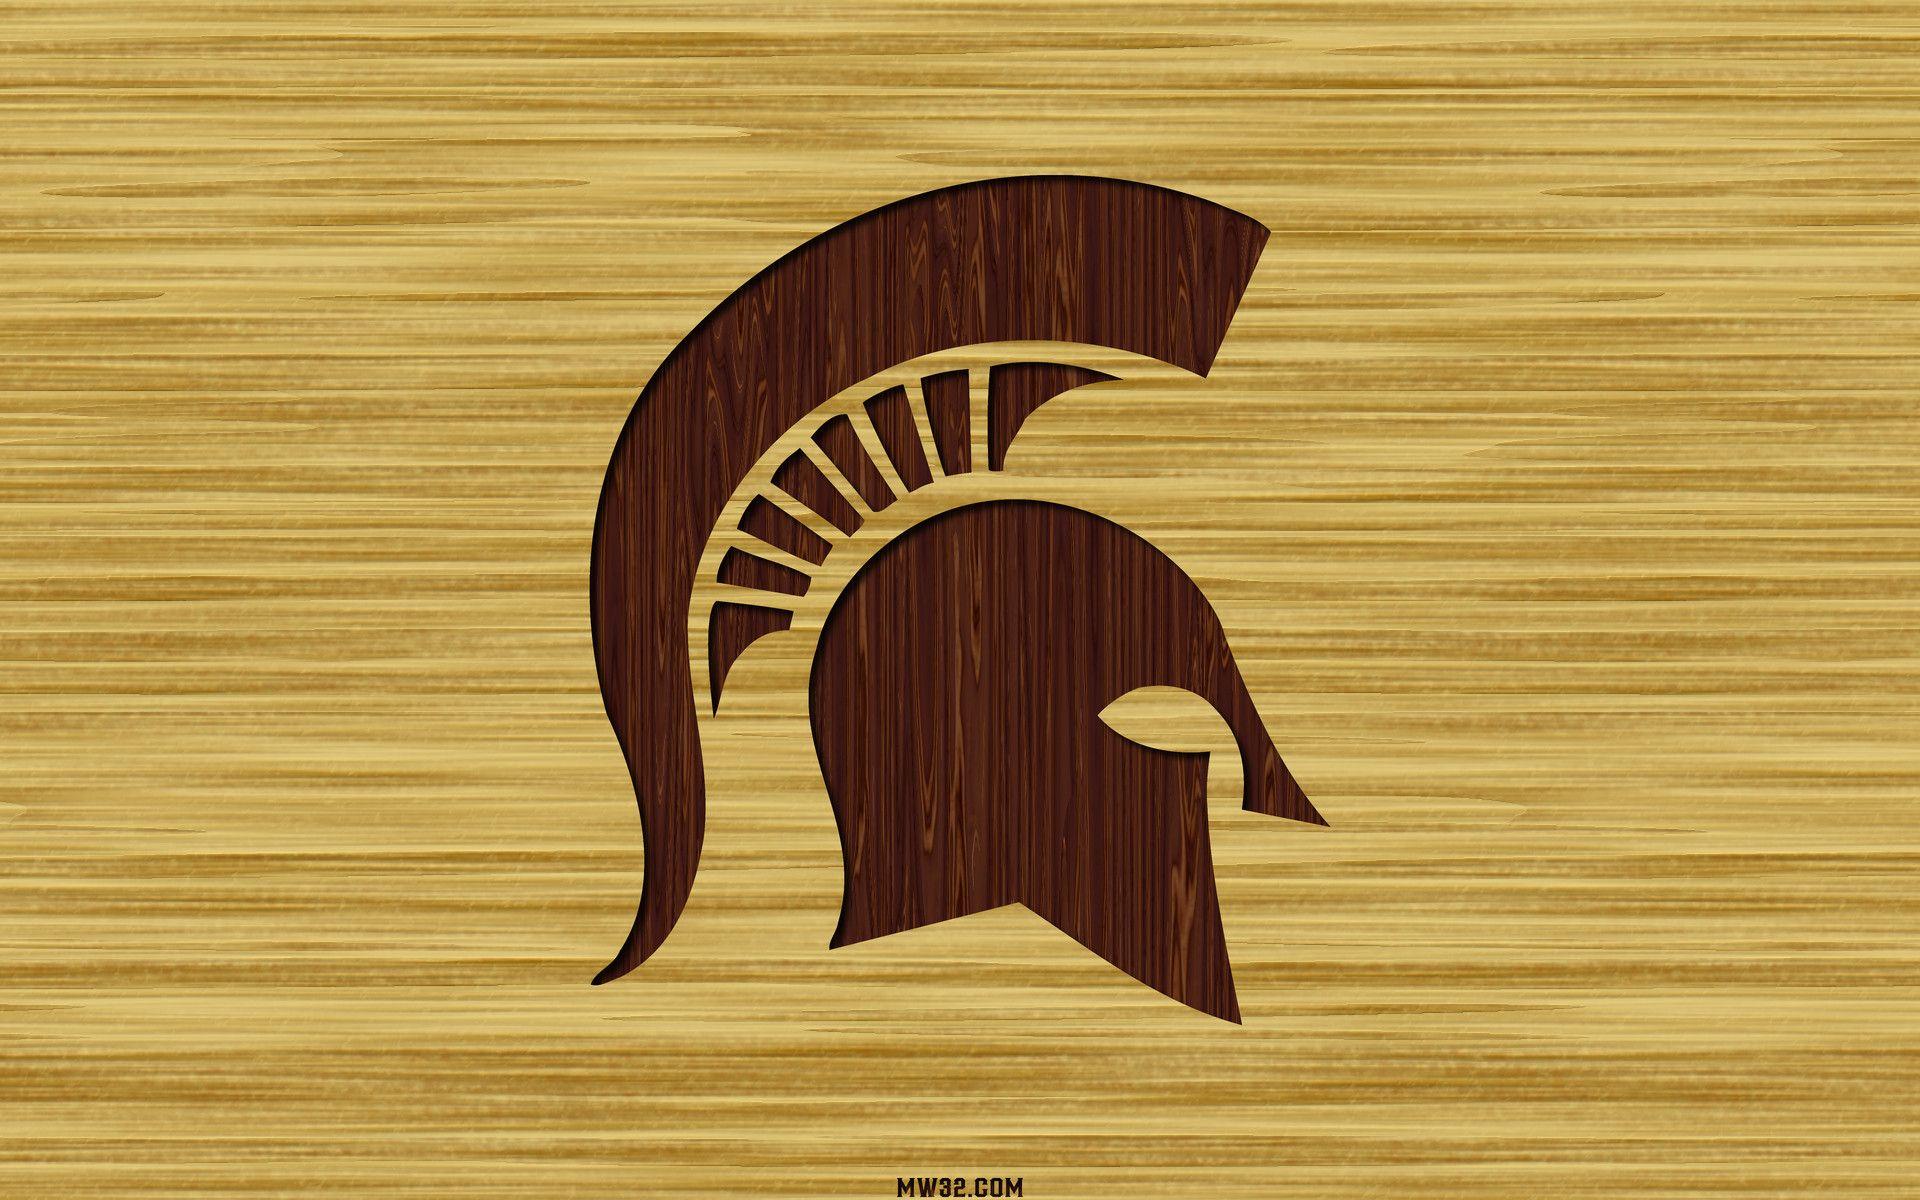 MonkeyWrench32 Michigan State Carved Wood